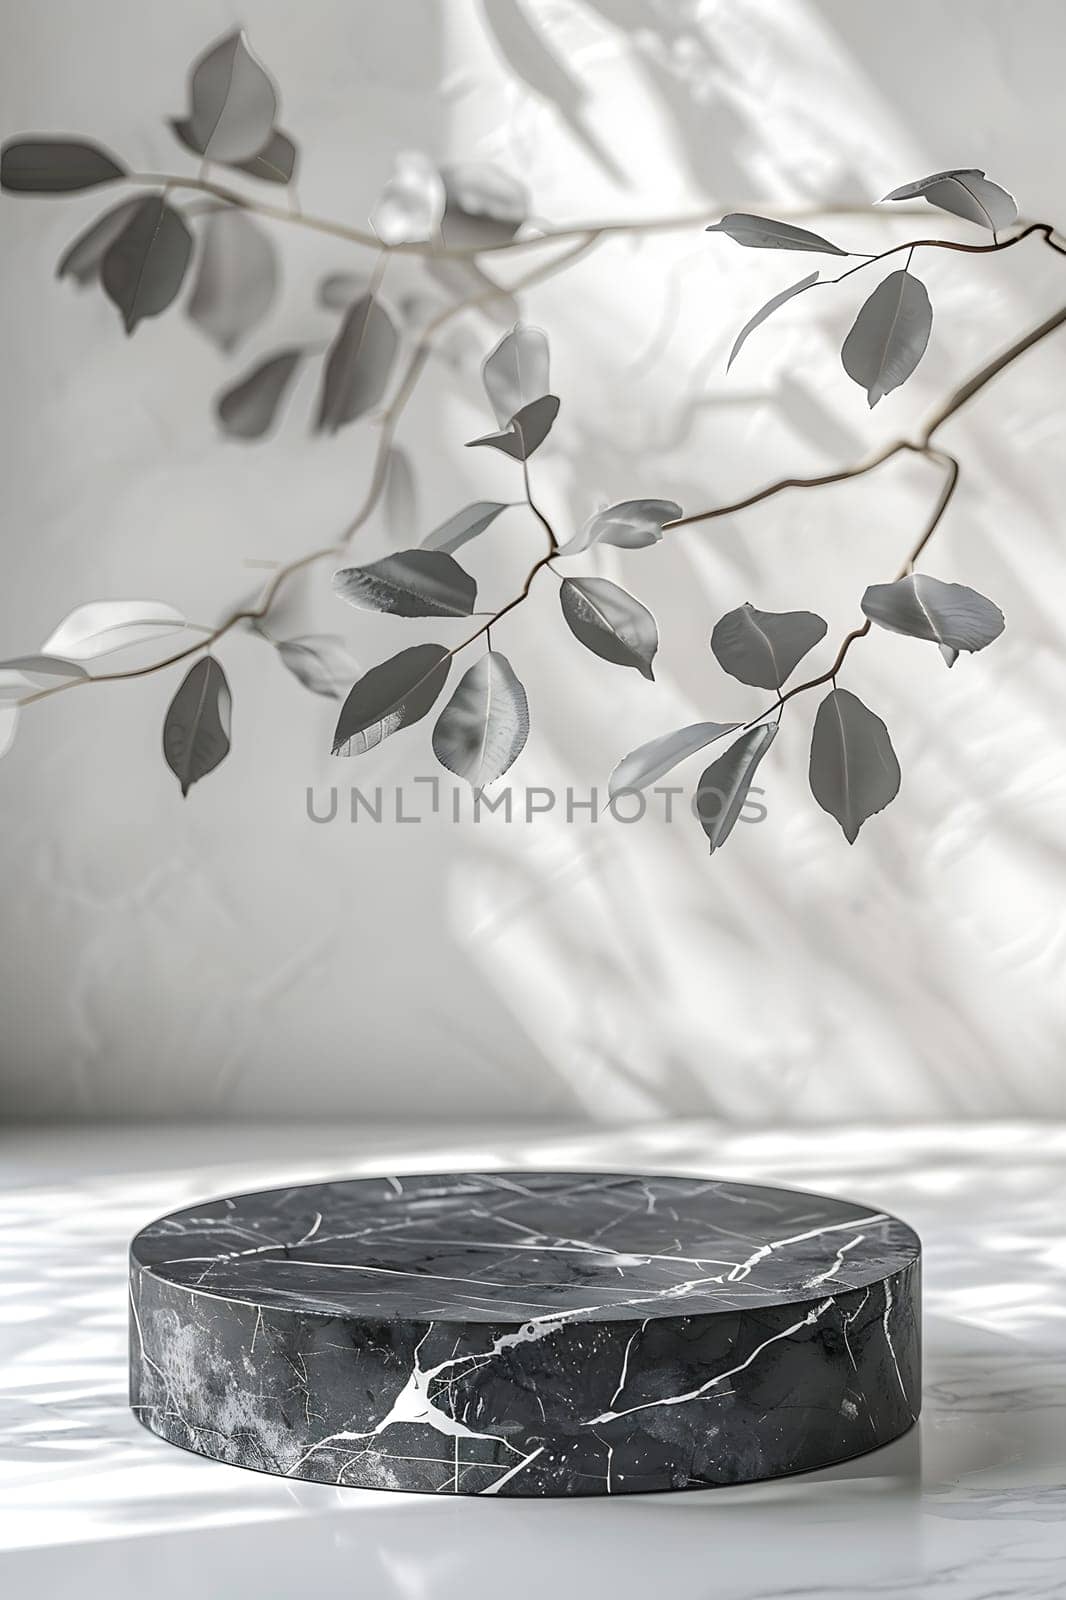 Monochrome photo of a black marble podium with natural material leaves by Nadtochiy